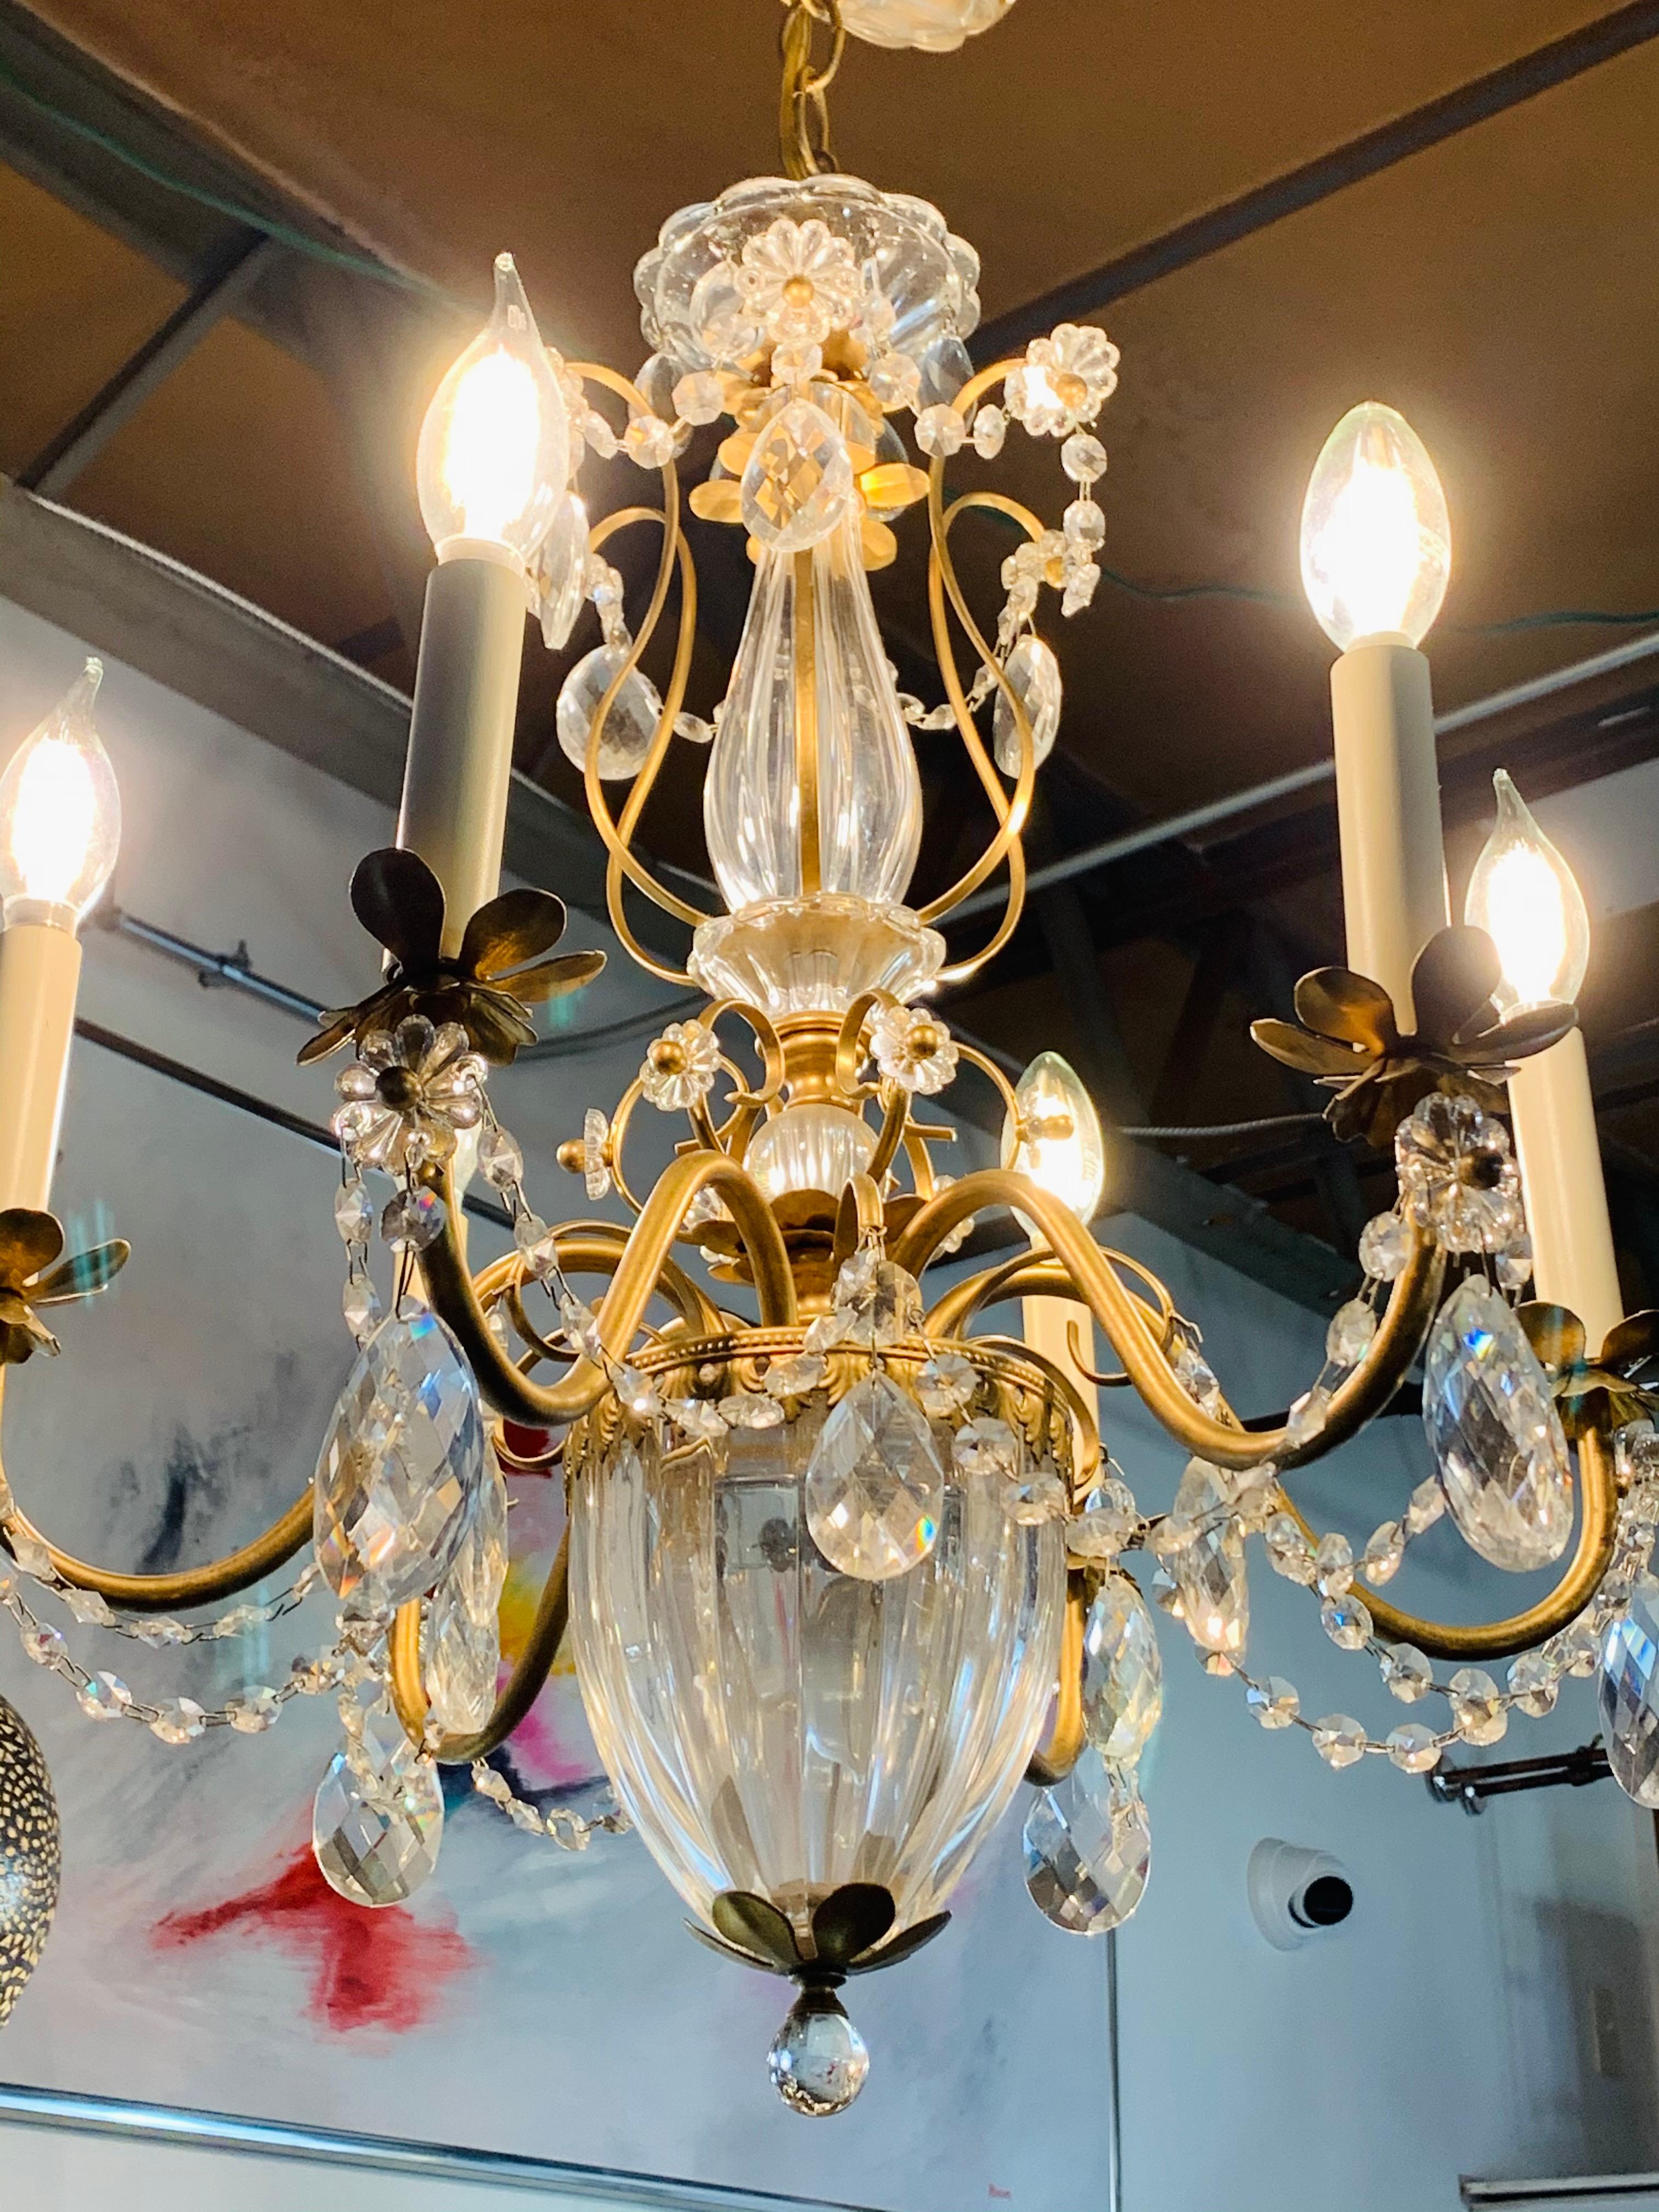 A beautiful French brass chandelier featuring crystal ropes, drops and two glass center posts. The chandelier is decorated with flower shaped crystals. There are six candelabra sockets in the arms facing upwards. Each candelabra sits on a flower